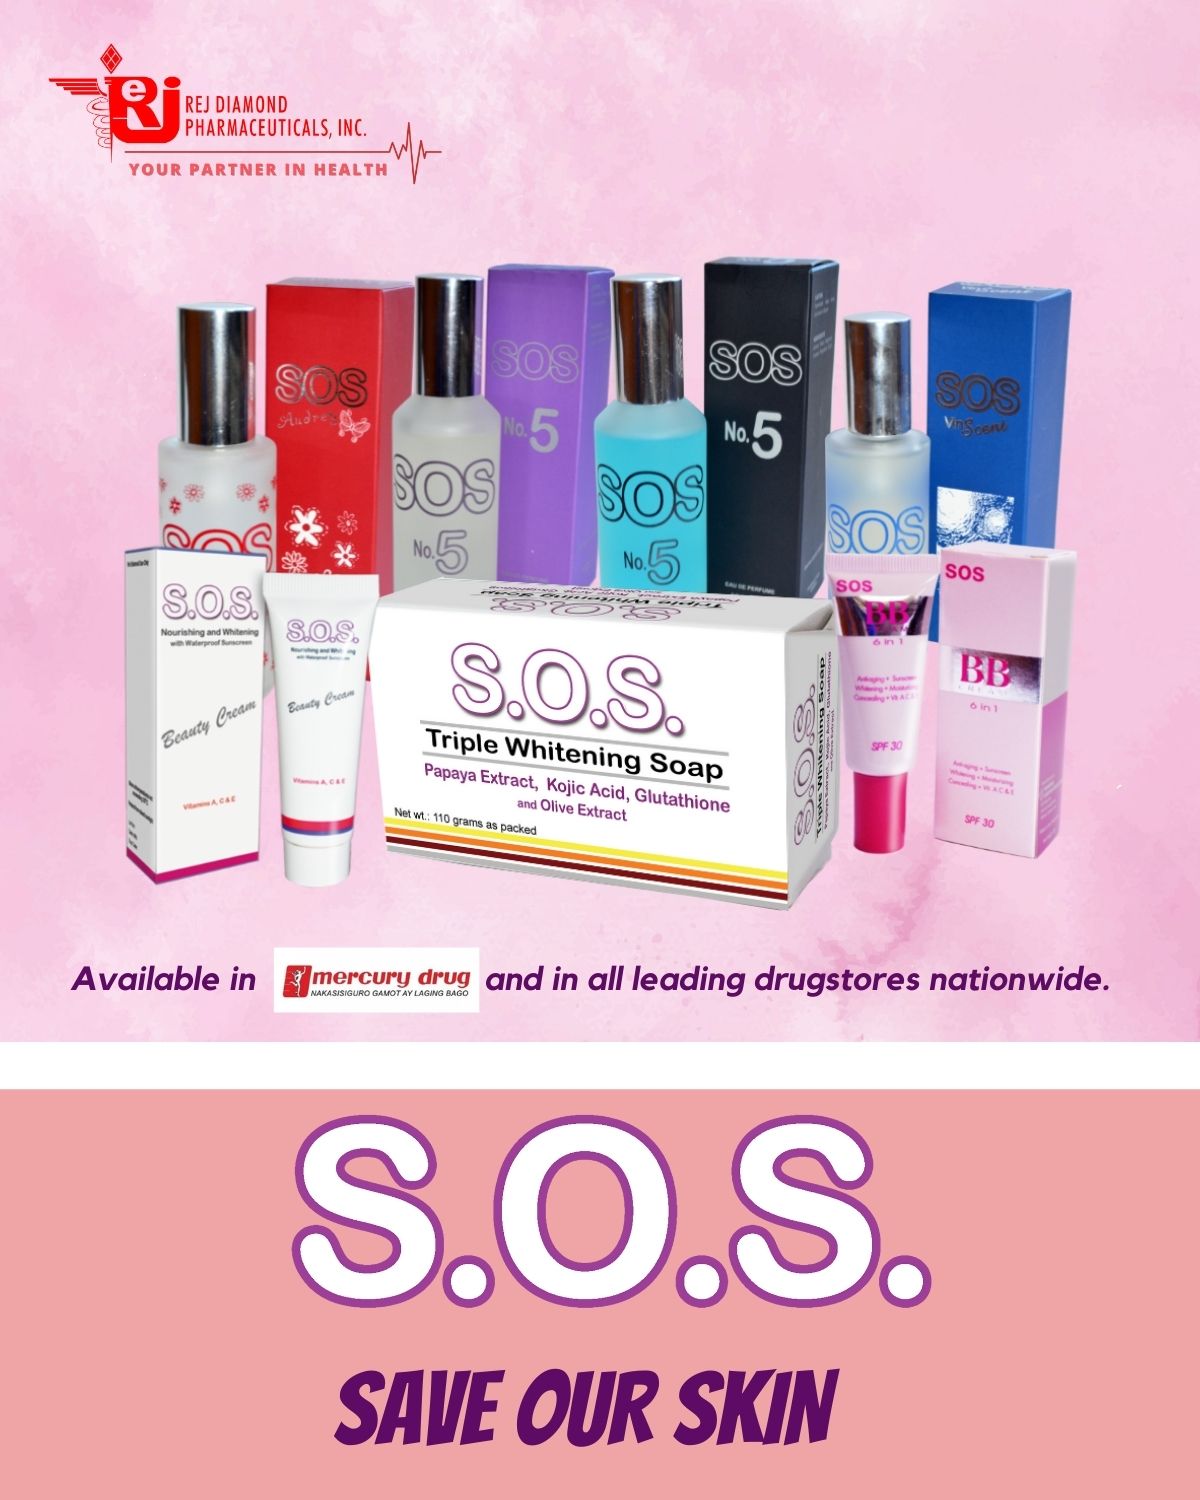 SAVE OUR SKIN (SOS)